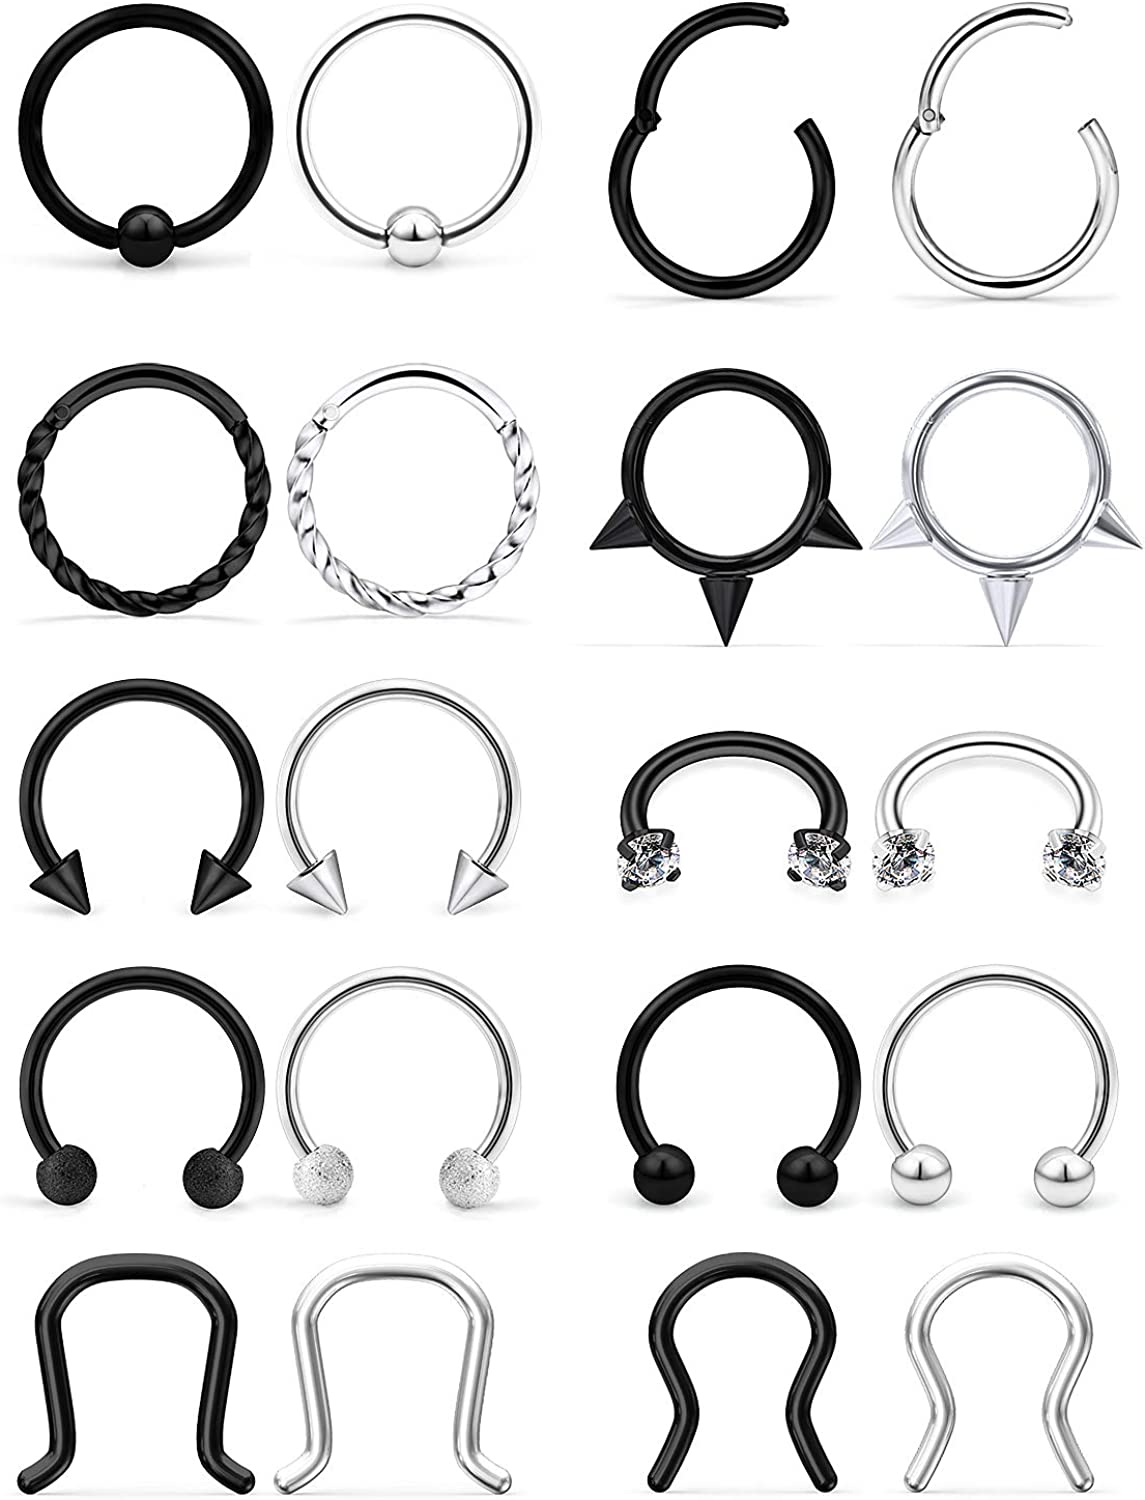 SCERRING 16G Septum Jewelry Stainless Steel Hinged Seamless Nose Hoop Ring Cartilage Daith Tragus Clicker Rings Retainer Body Piercing Jewelry 18-20PCS